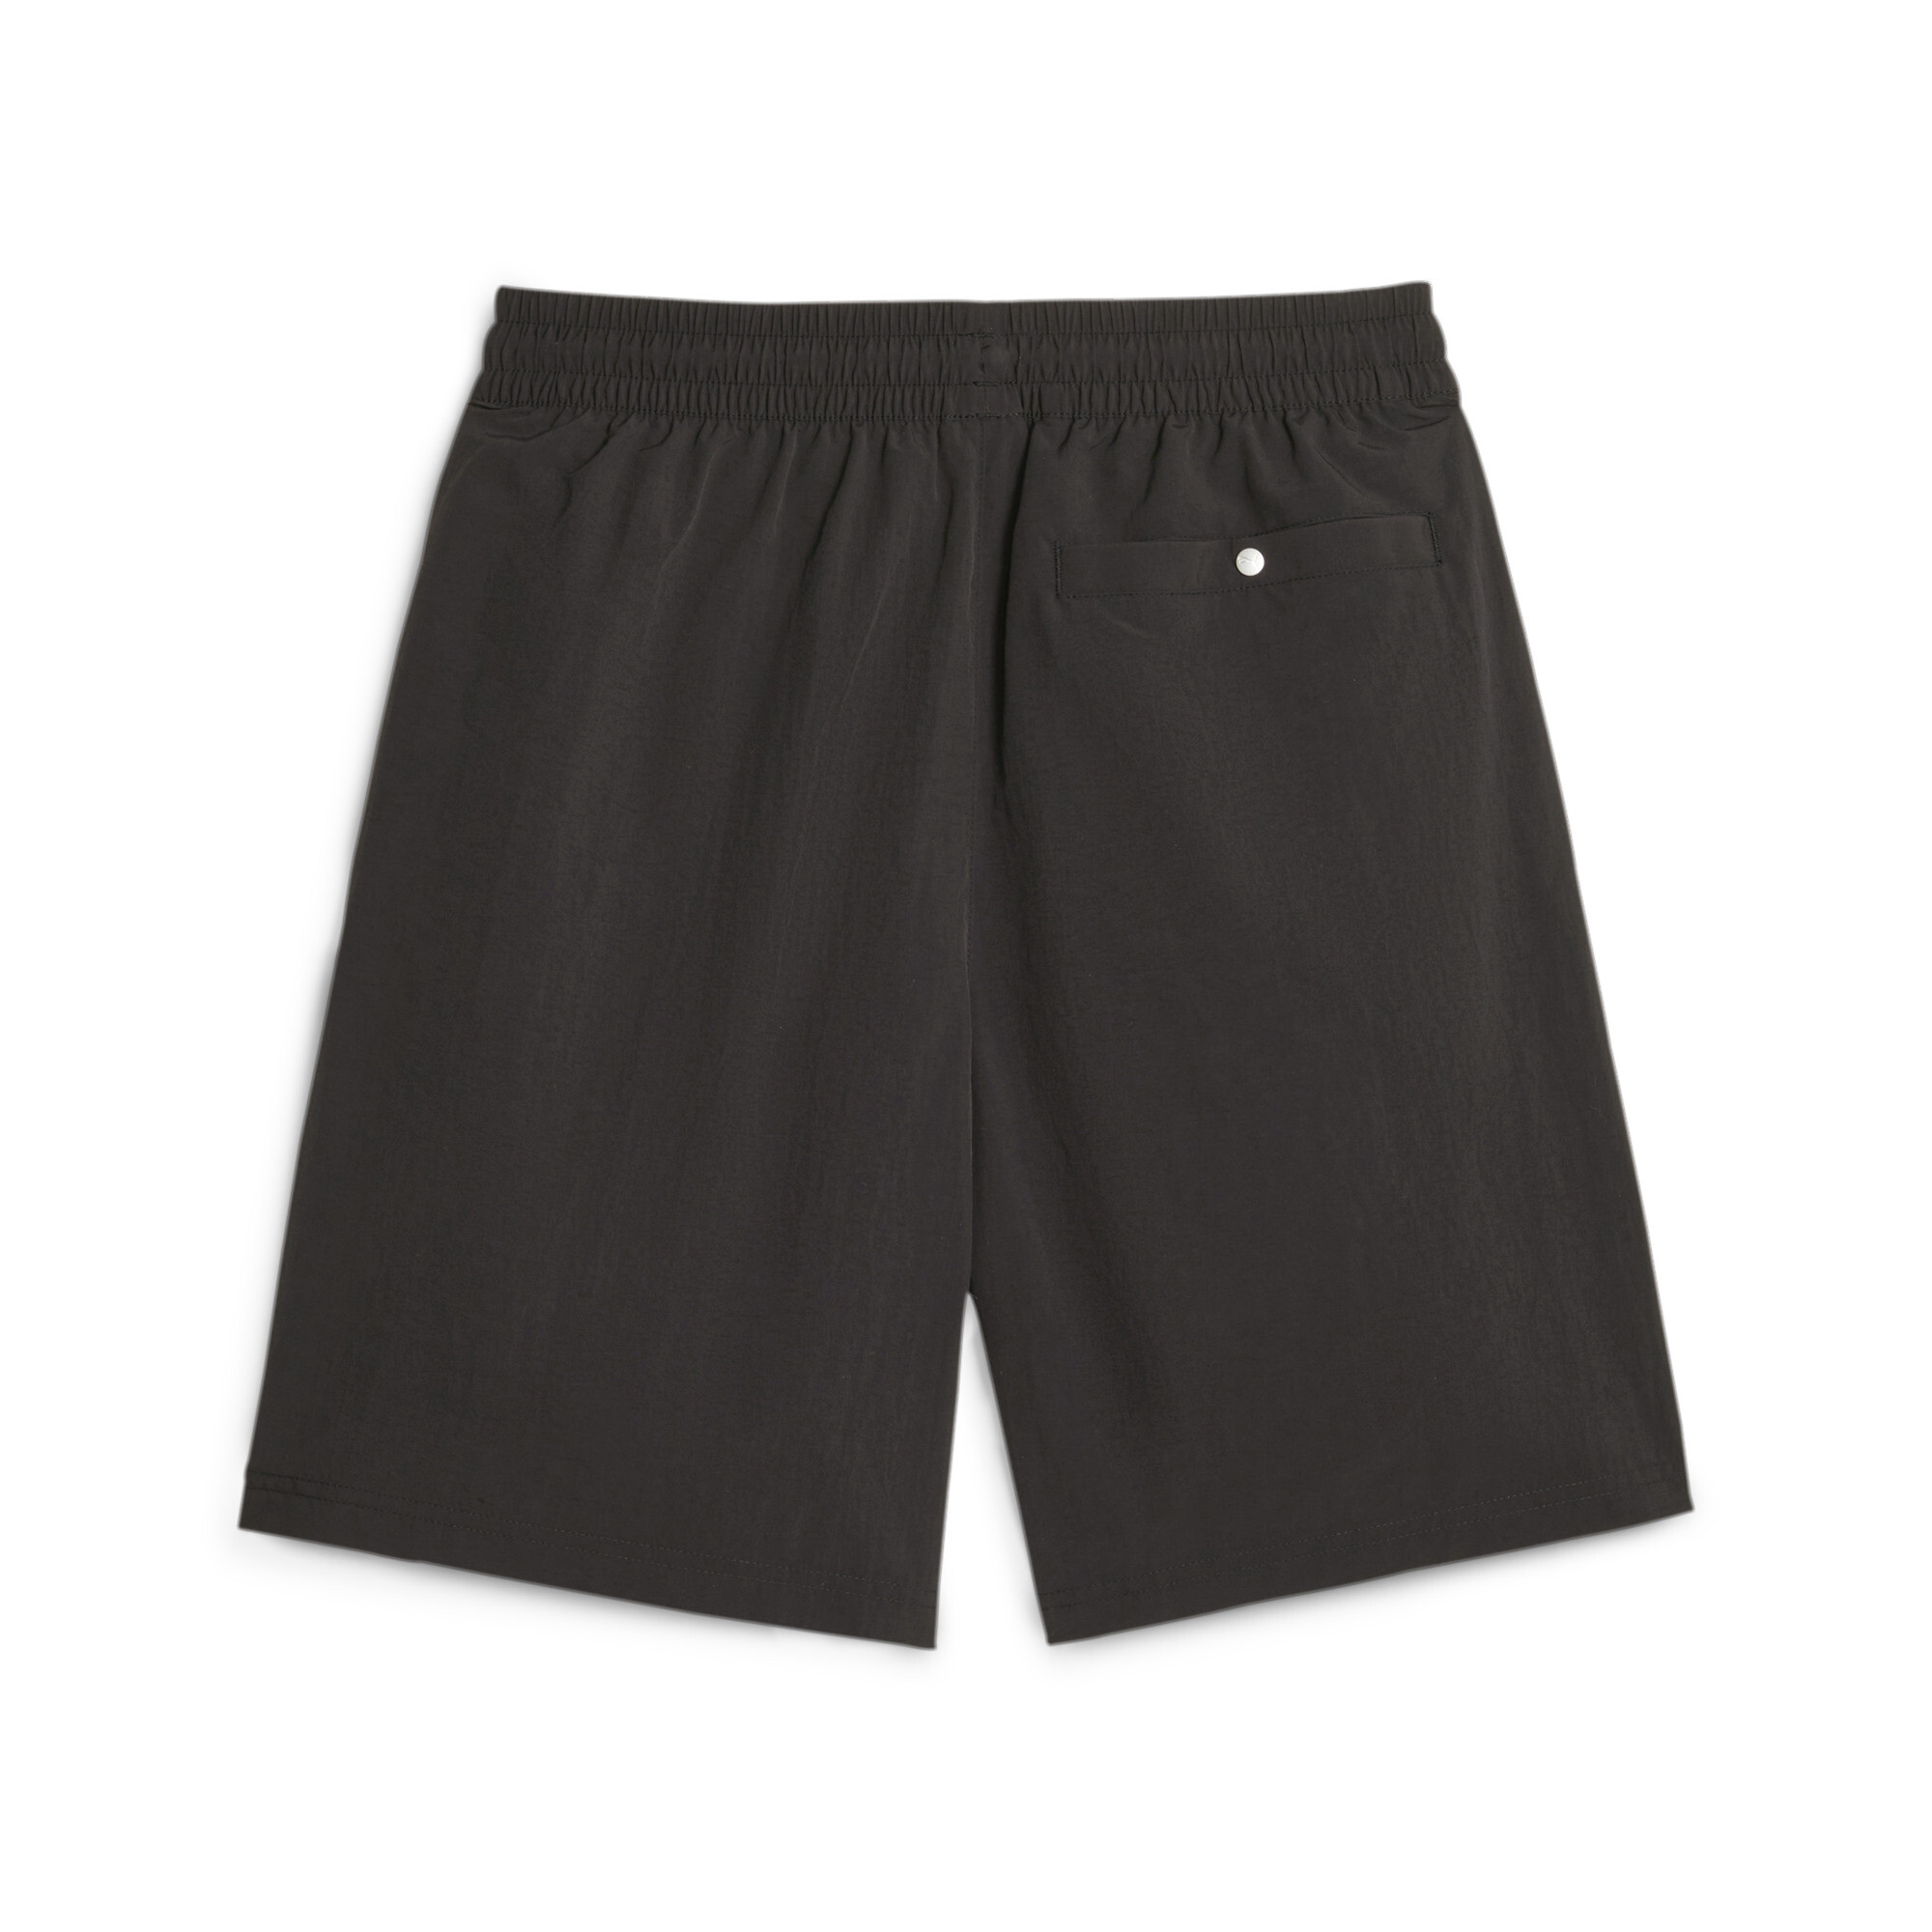 Men's PUMA TEAM Relaxed Shorts In Black, Size 2XL